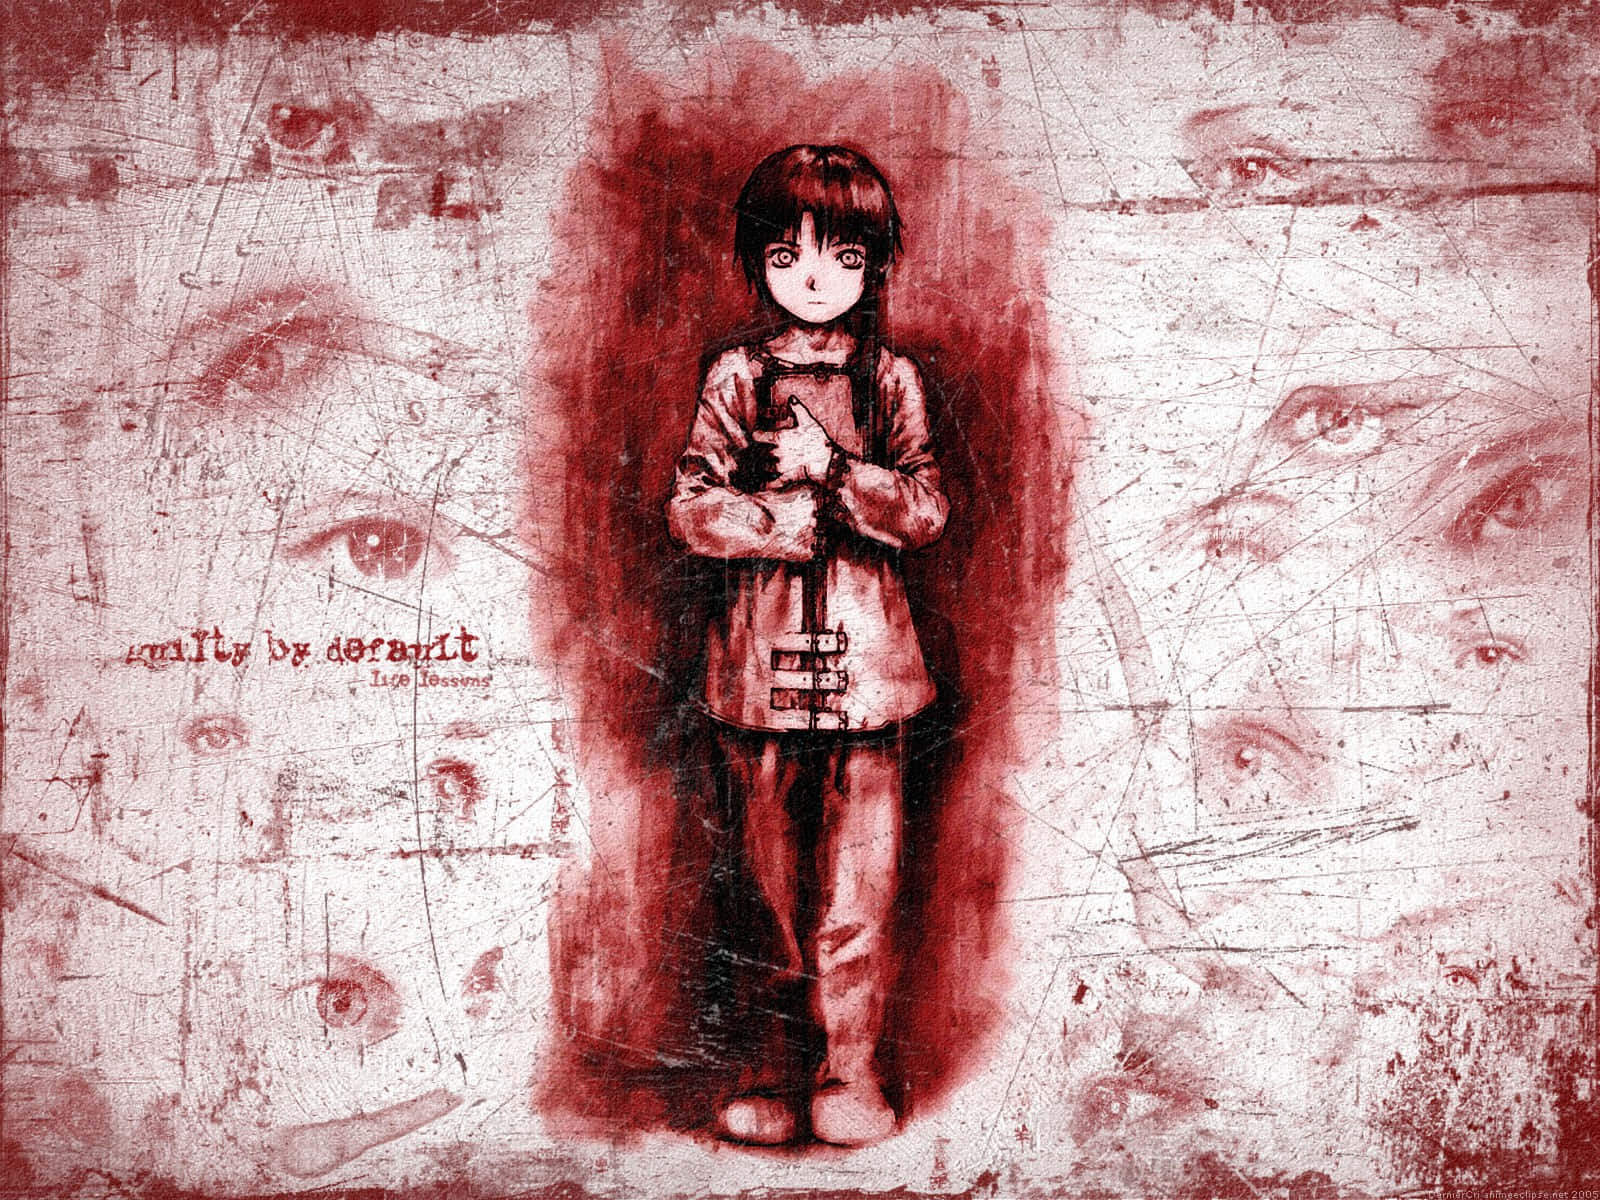 Serial Experiments: Lain - A Science-fiction Anime Show